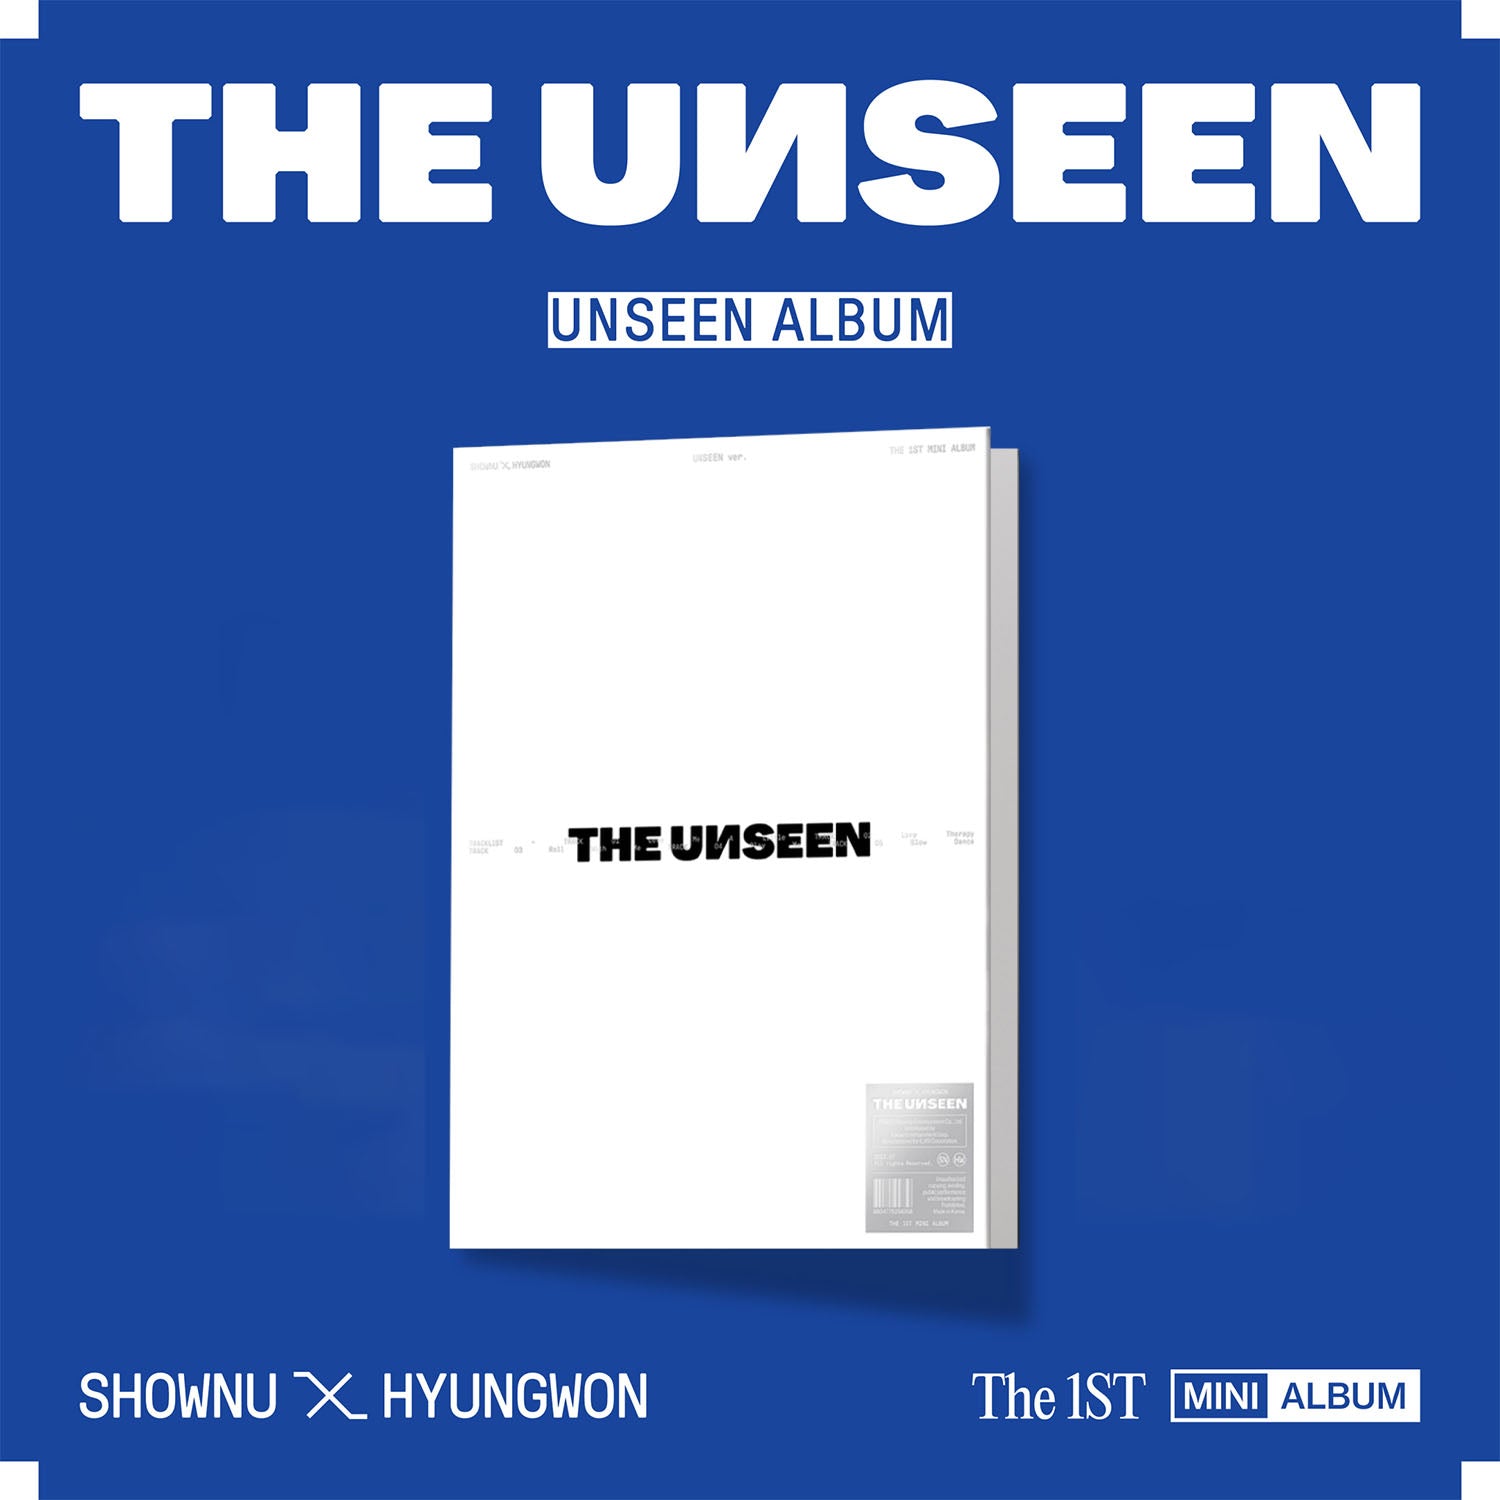 SHOWNU X HYUNGWON - [THE UNSEEN] (1st Mini Album Limited Edition UNSEEN Version)